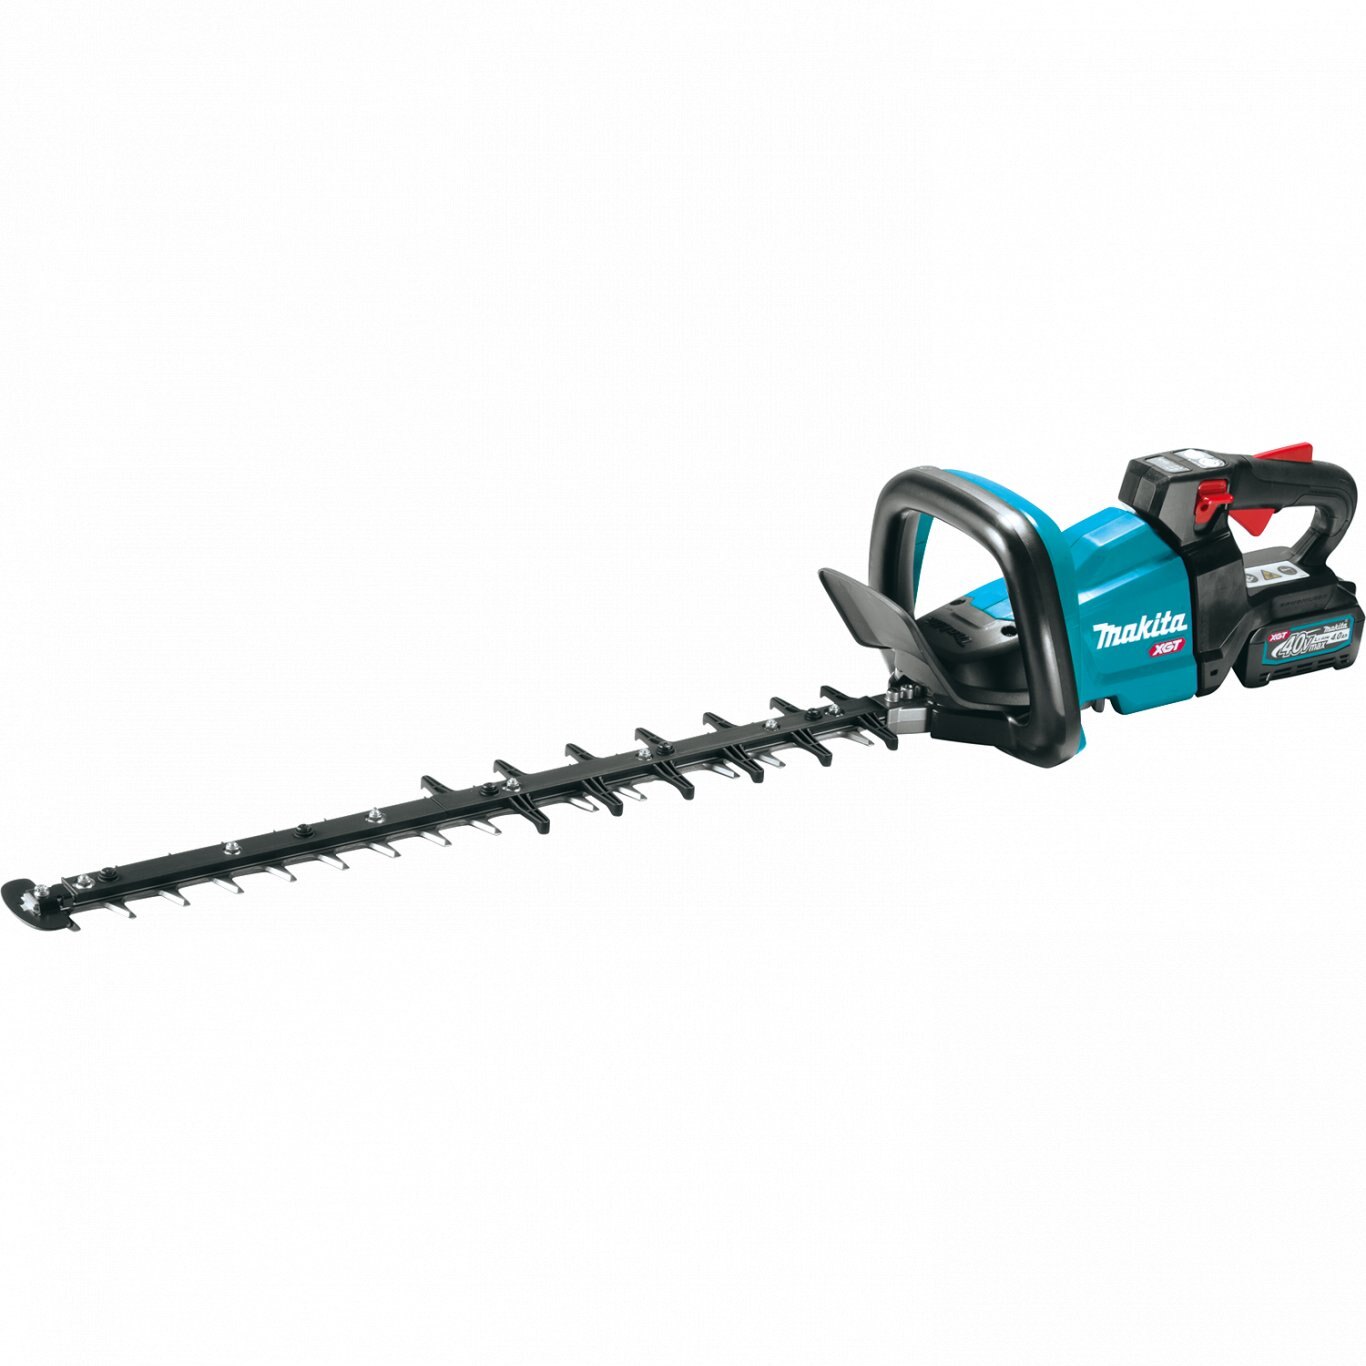 Makita 40V max XGT® Brushless Cordless 24 Rough Cut Hedge Trimmer, Tool Only